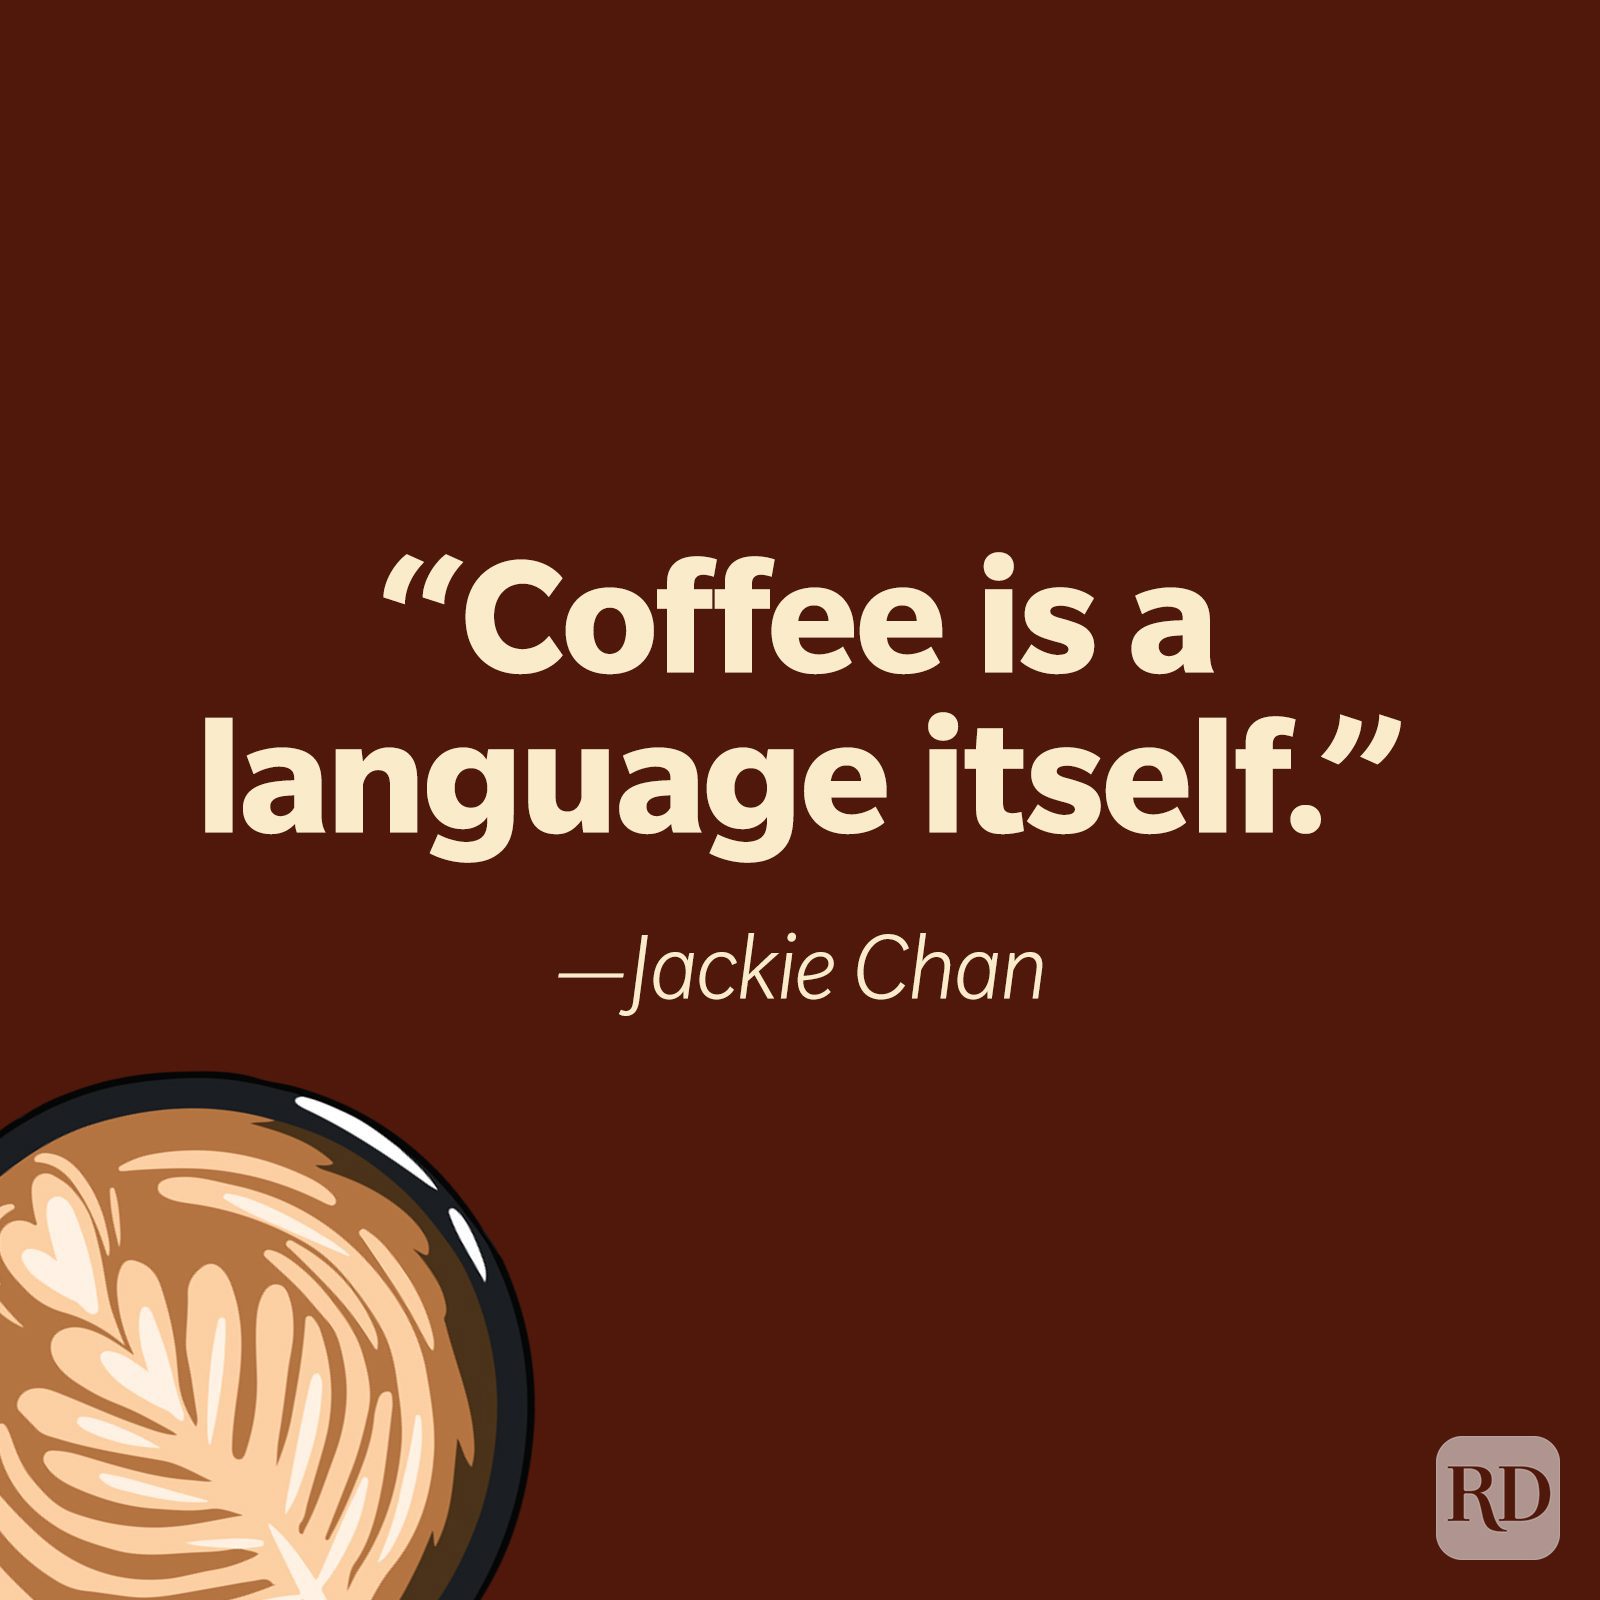 https://www.rd.com/wp-content/uploads/2023/03/Funny-Coffee-Quote-Jackie-Chan.jpg?fit=680%2C680